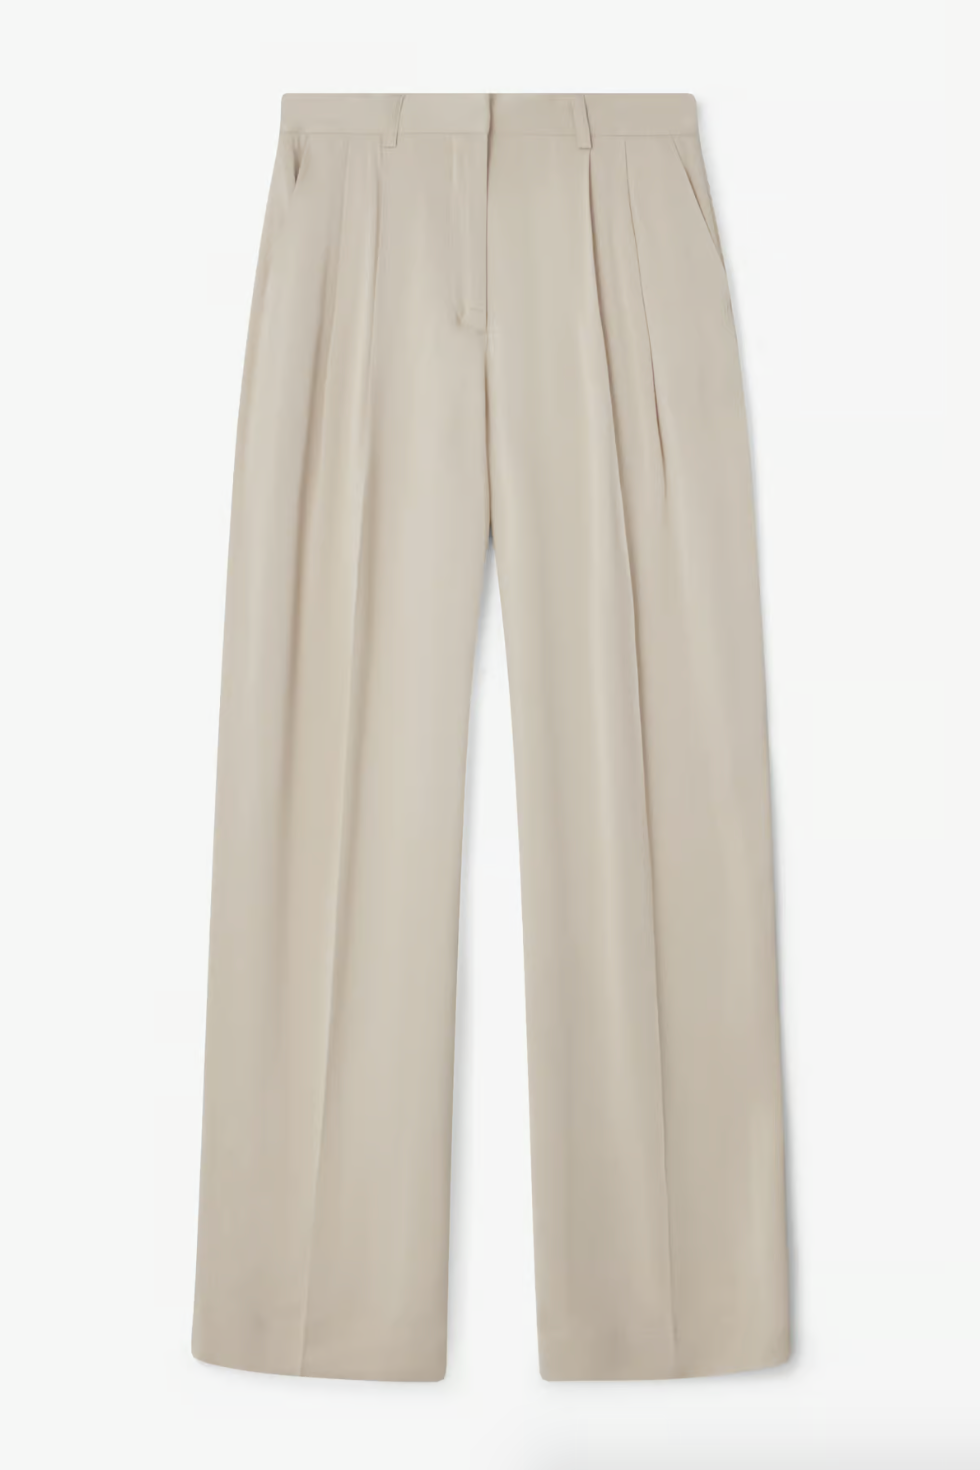 WIDE SUIT TROUSERS: PEARL GREY